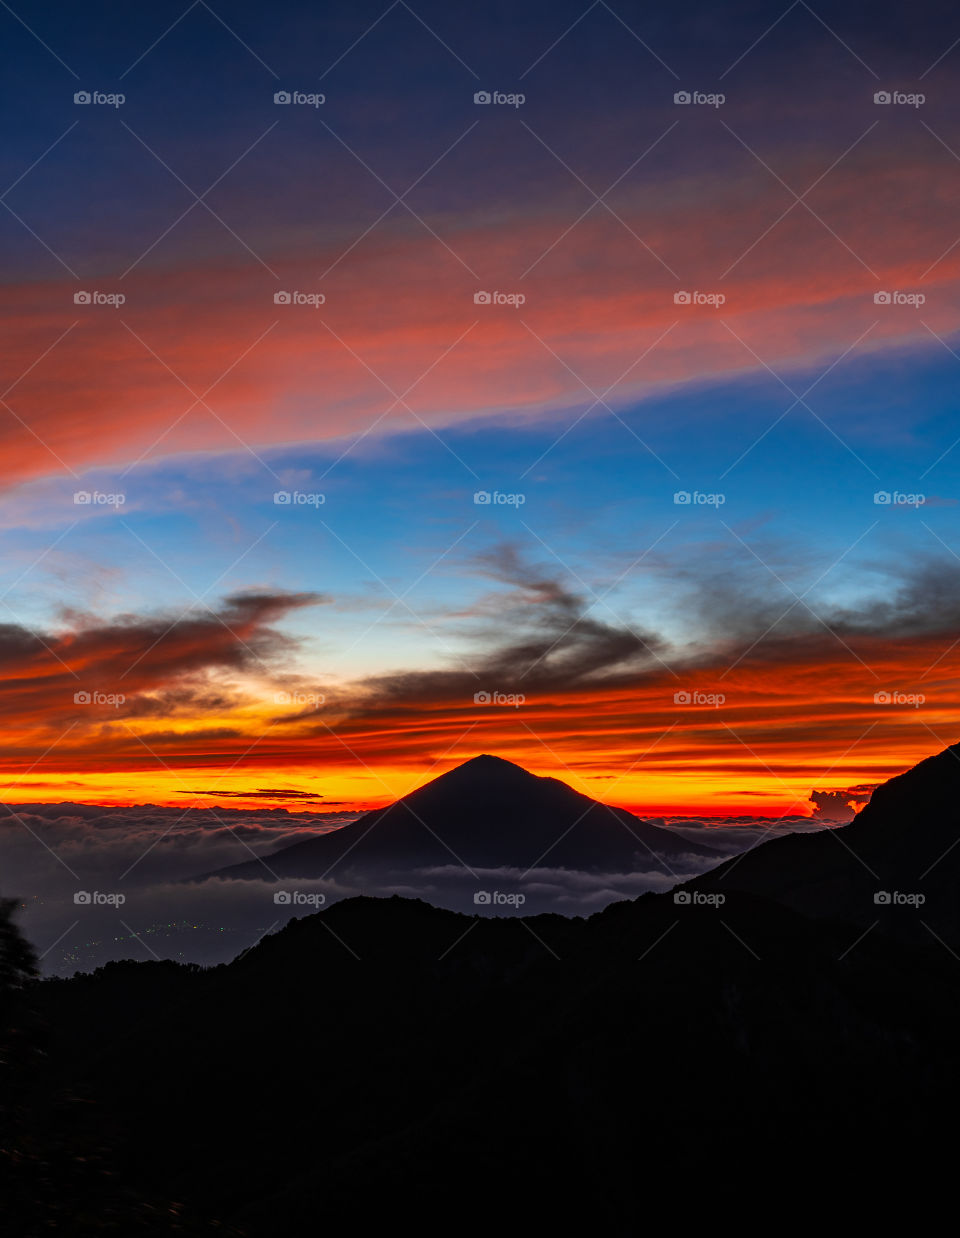 Orange in the sky, indicating that the morning sun will soon appear. The natural beauty of one of Indonesia's mountains